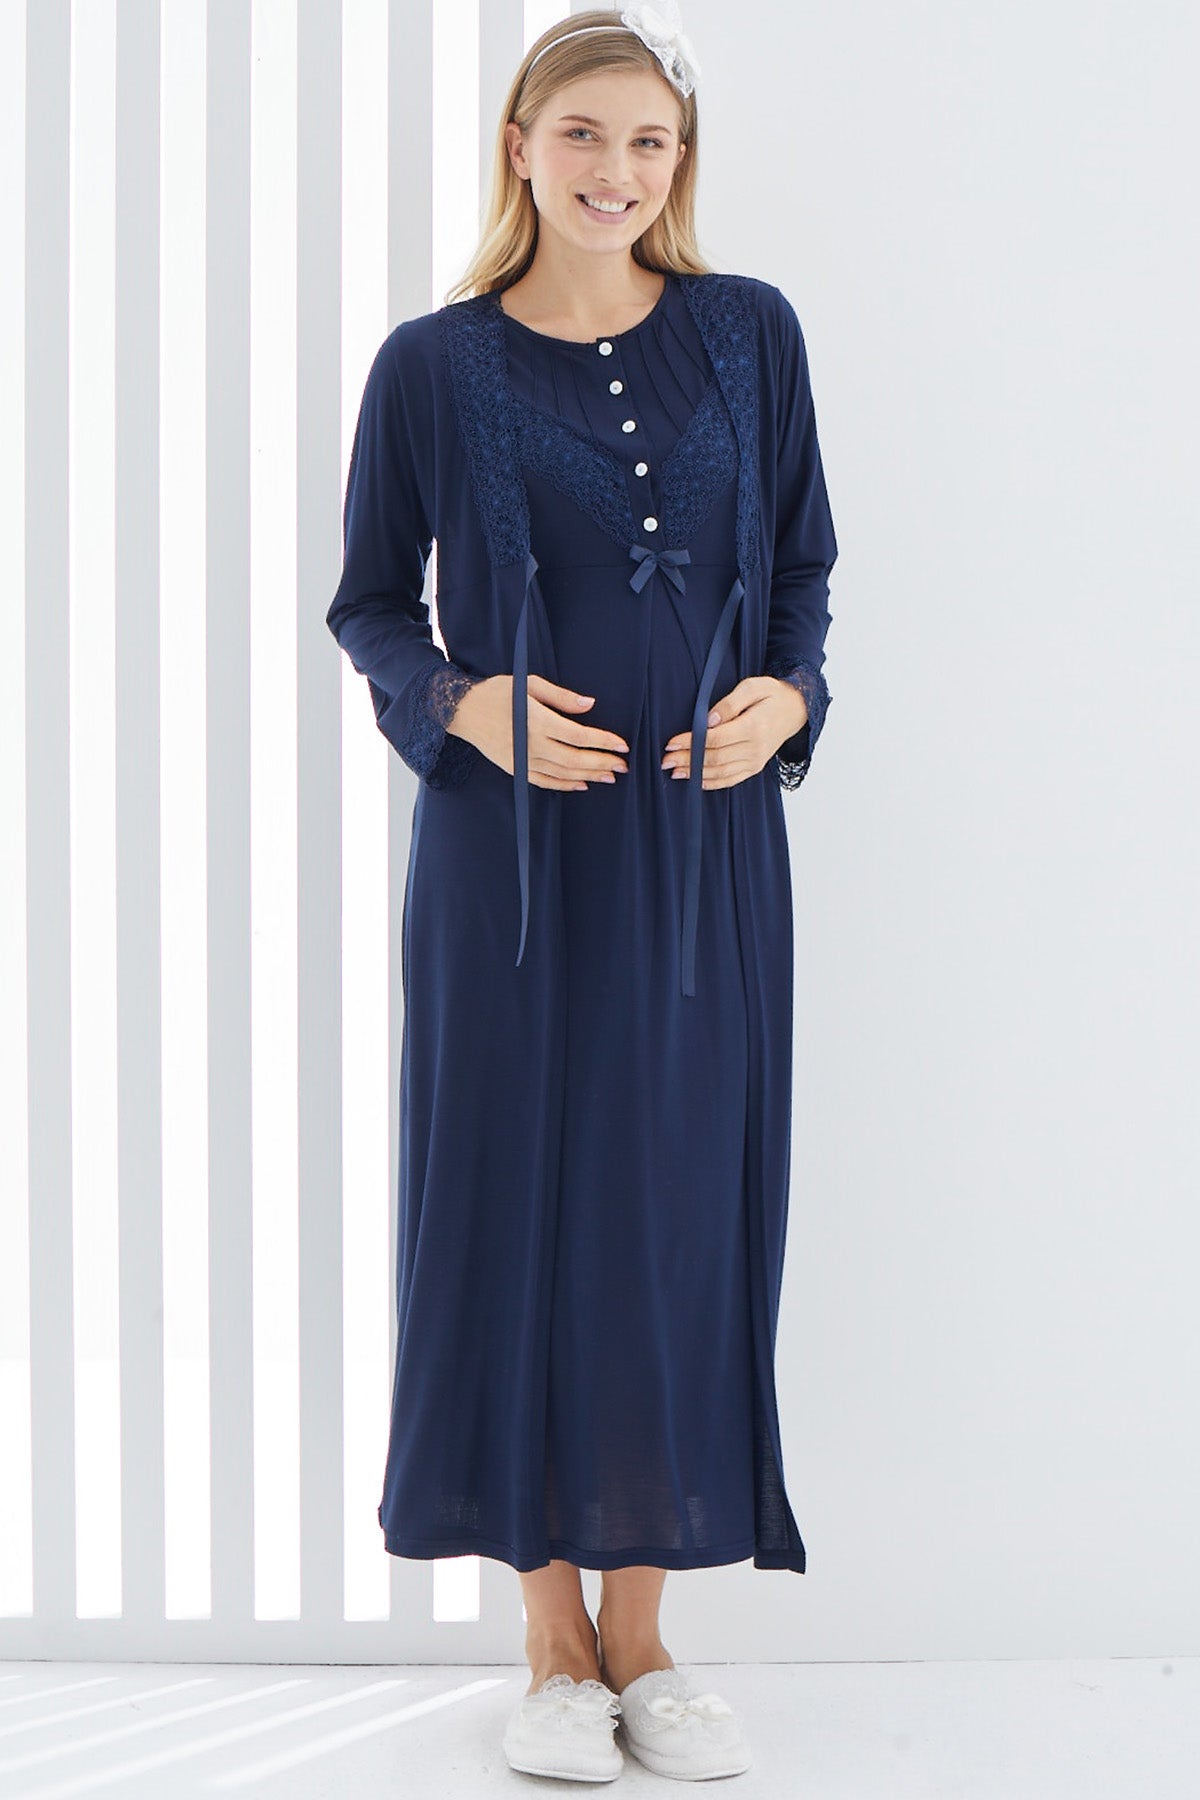 Lace Detailed Maternity & Nursing Nightgown With Robe Navy Blue - 2270